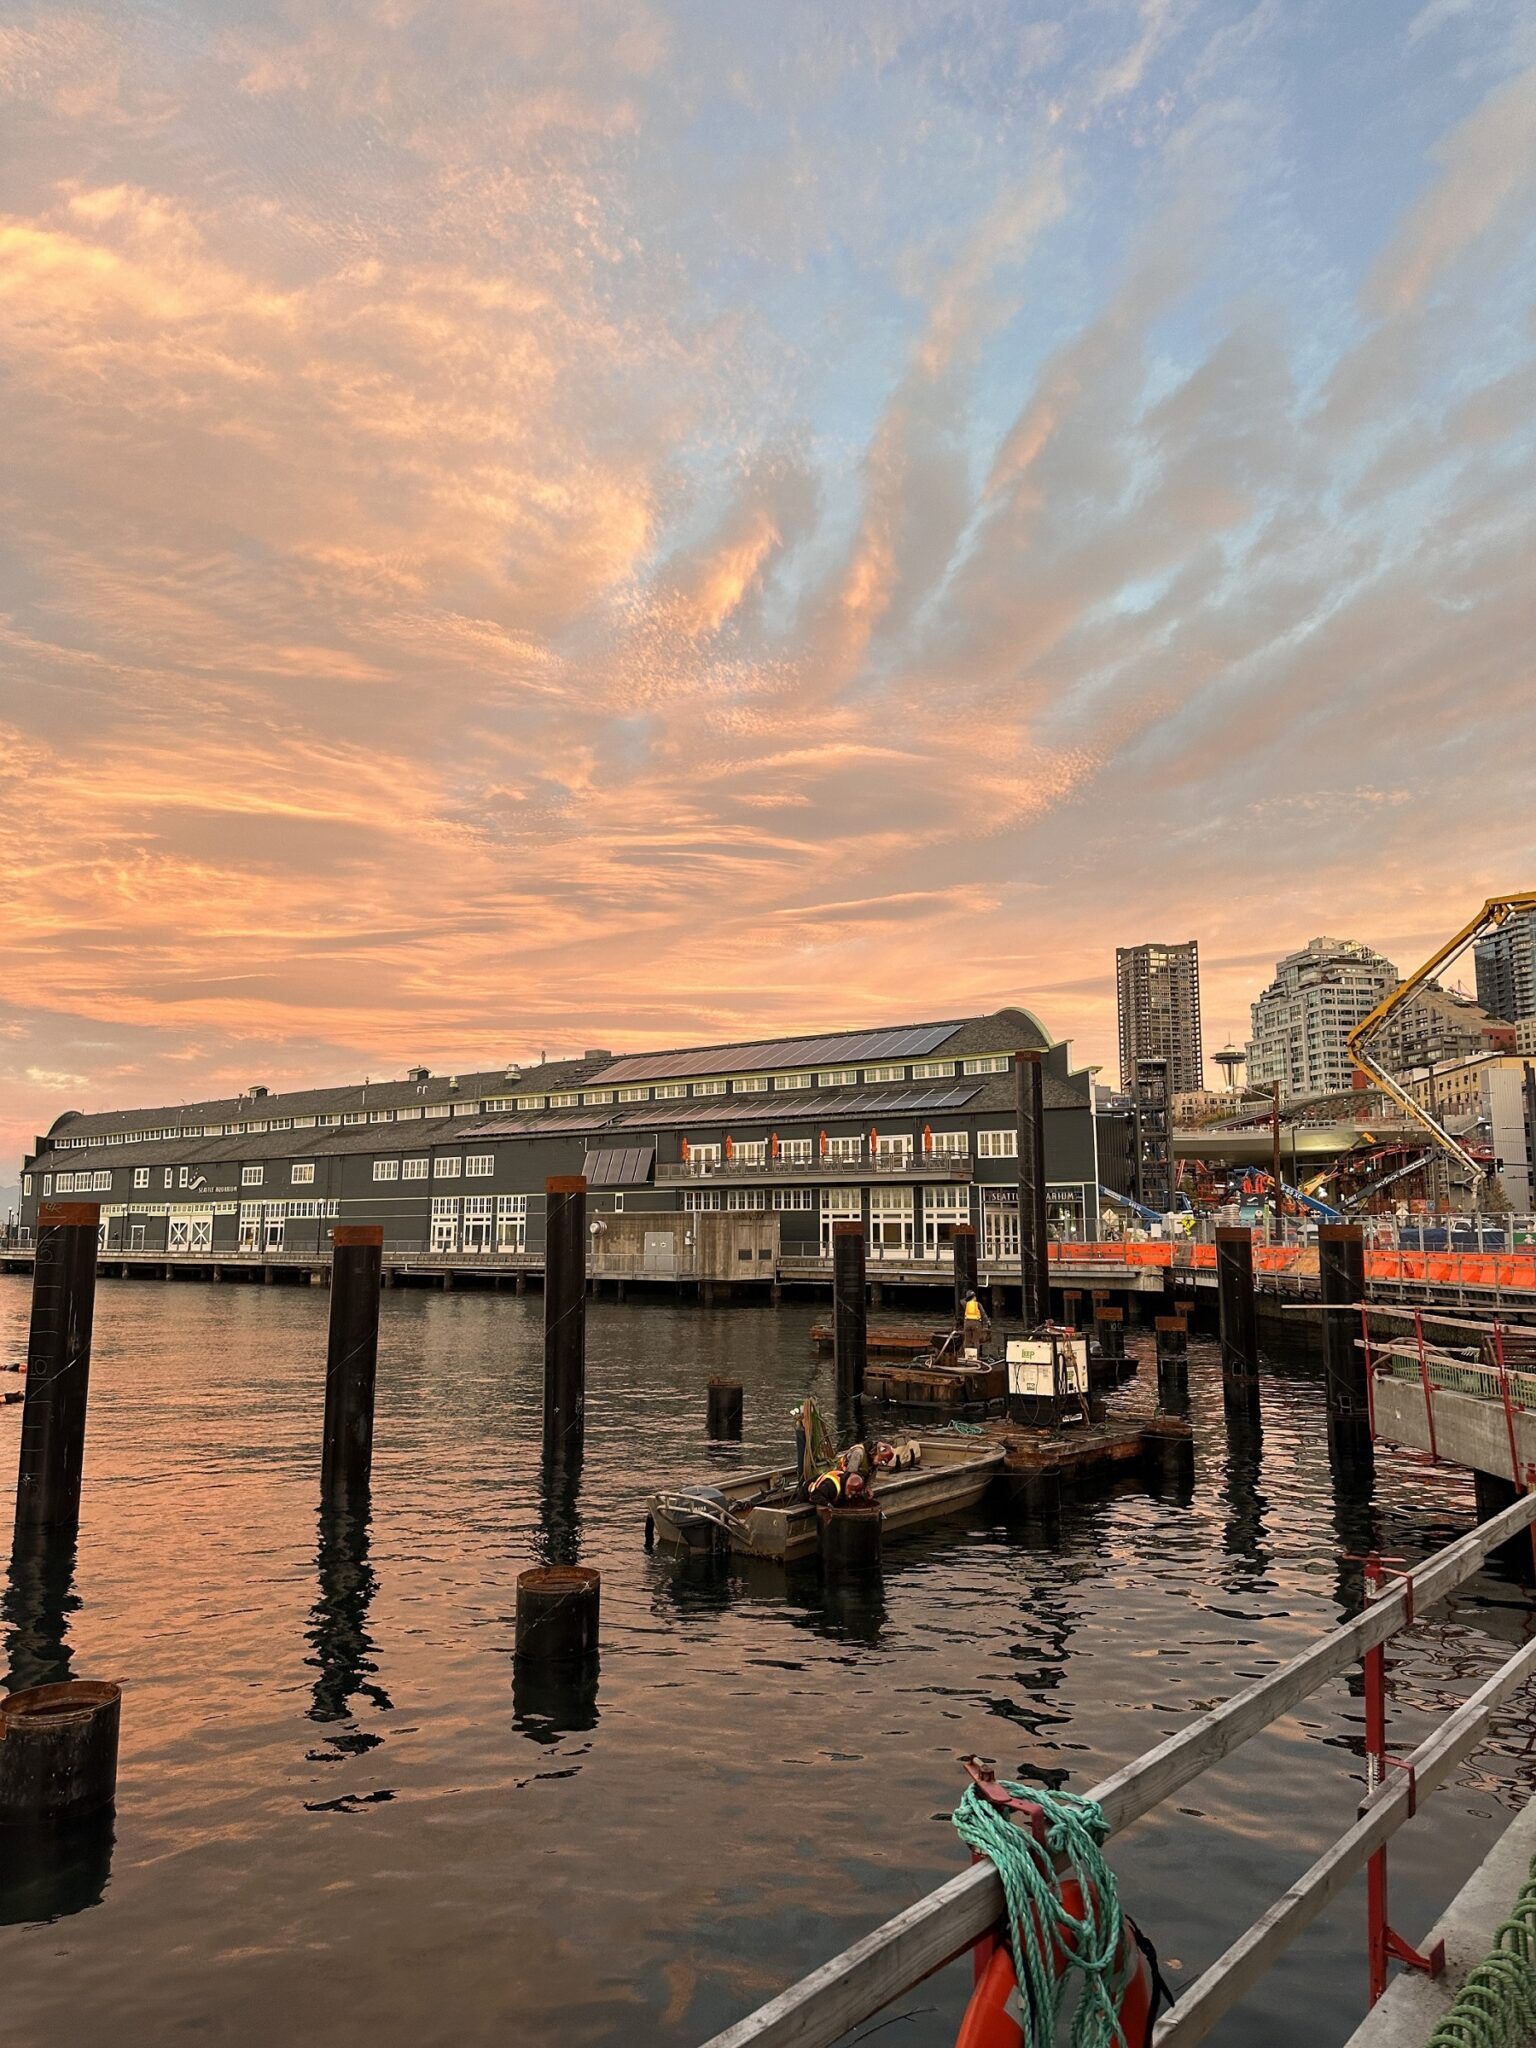 Photo of construction along water near sunset. Large buildings are in the background and middle of the image. A small boat is in the middle in the water.